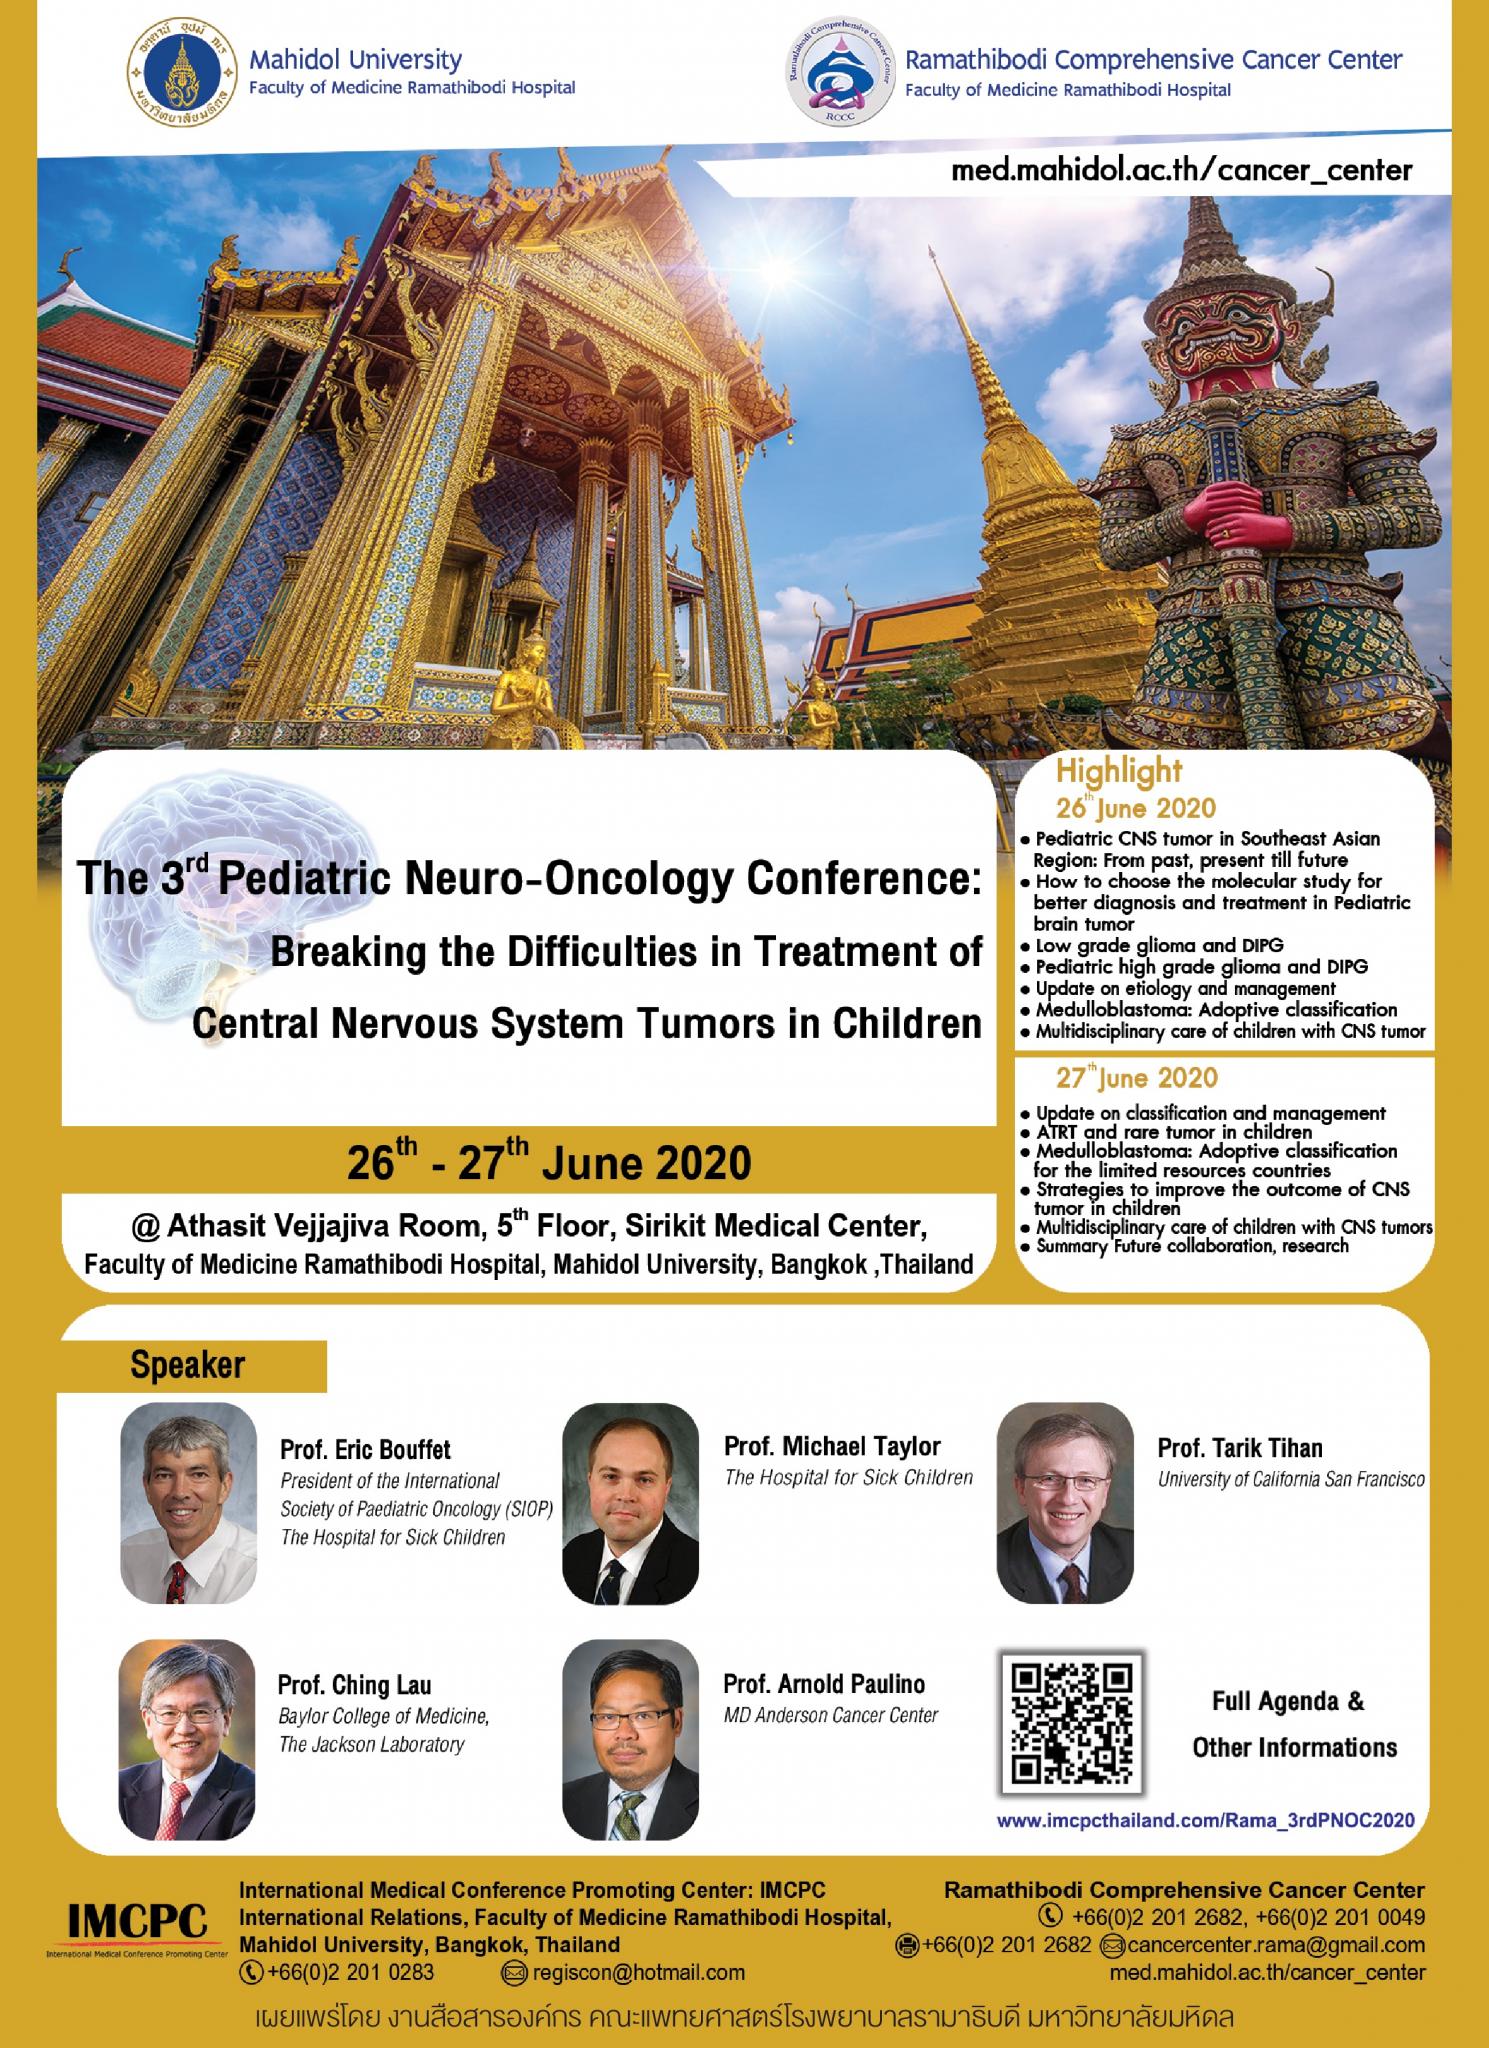 The 3rd Pediatric Neuro-Oncology Conference: Breaking the Difficulties in Treatment of Central Nervous System Tumor in Children